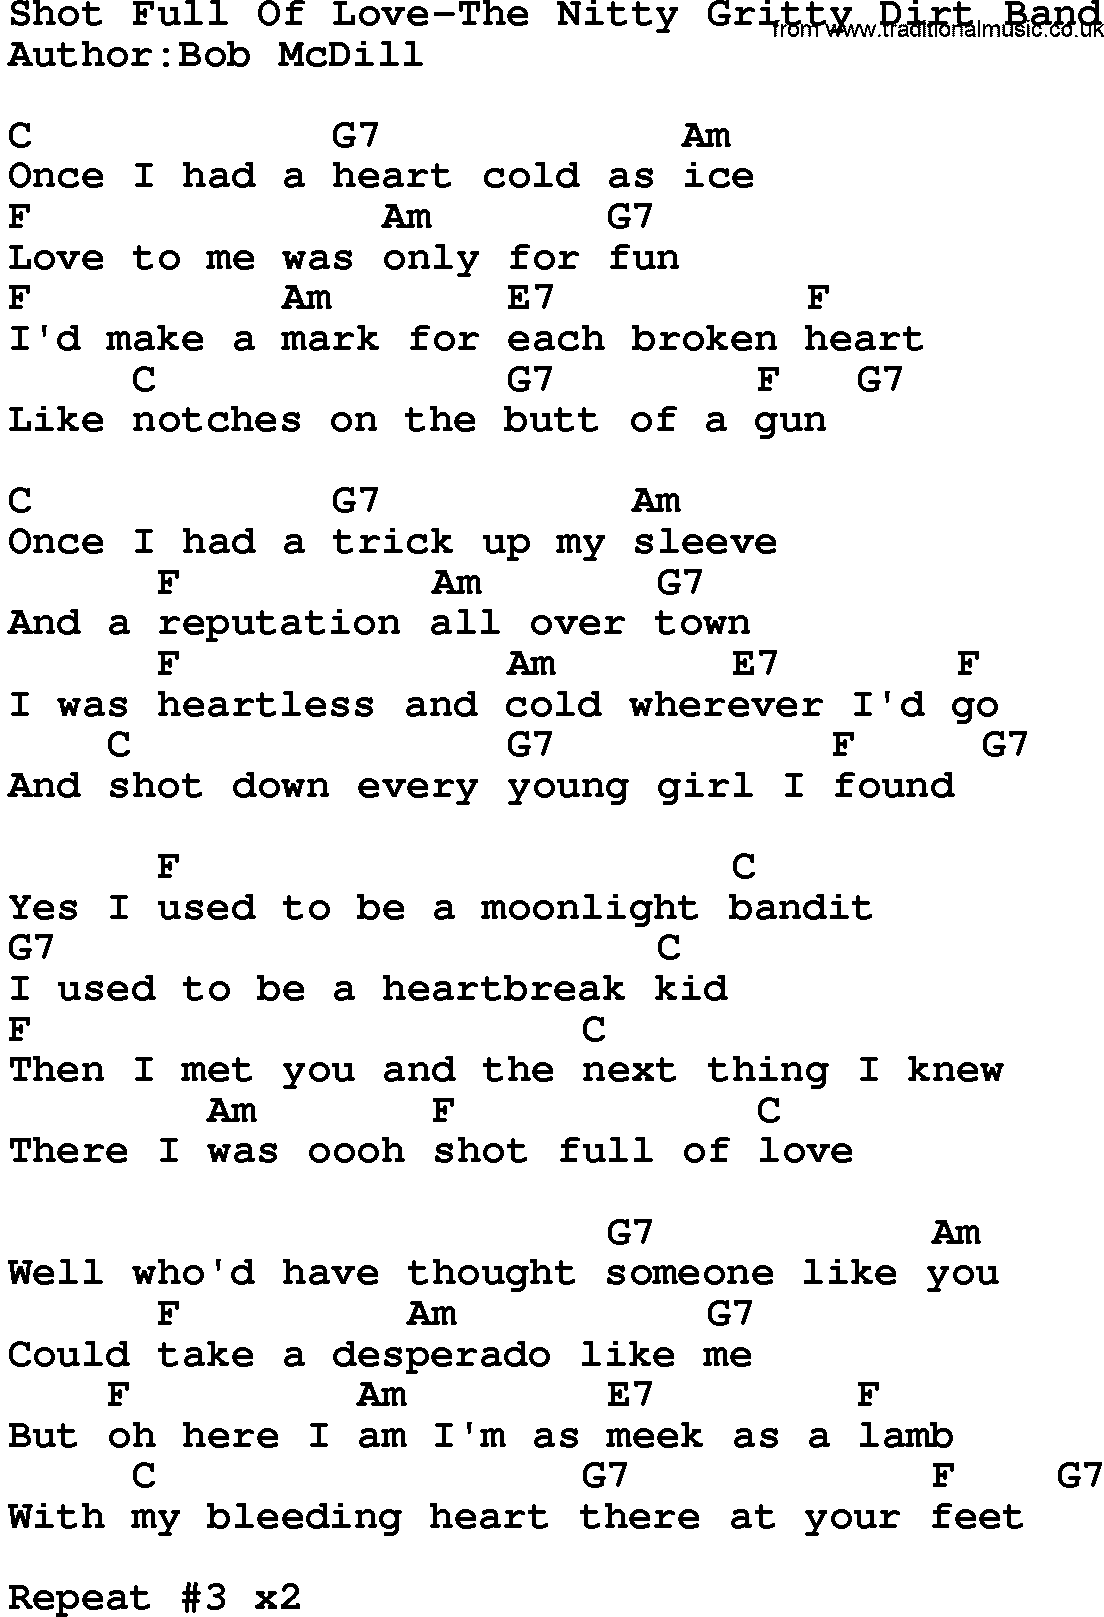 Country music song: Shot Full Of Love-The Nitty Gritty Dirt Band lyrics and chords